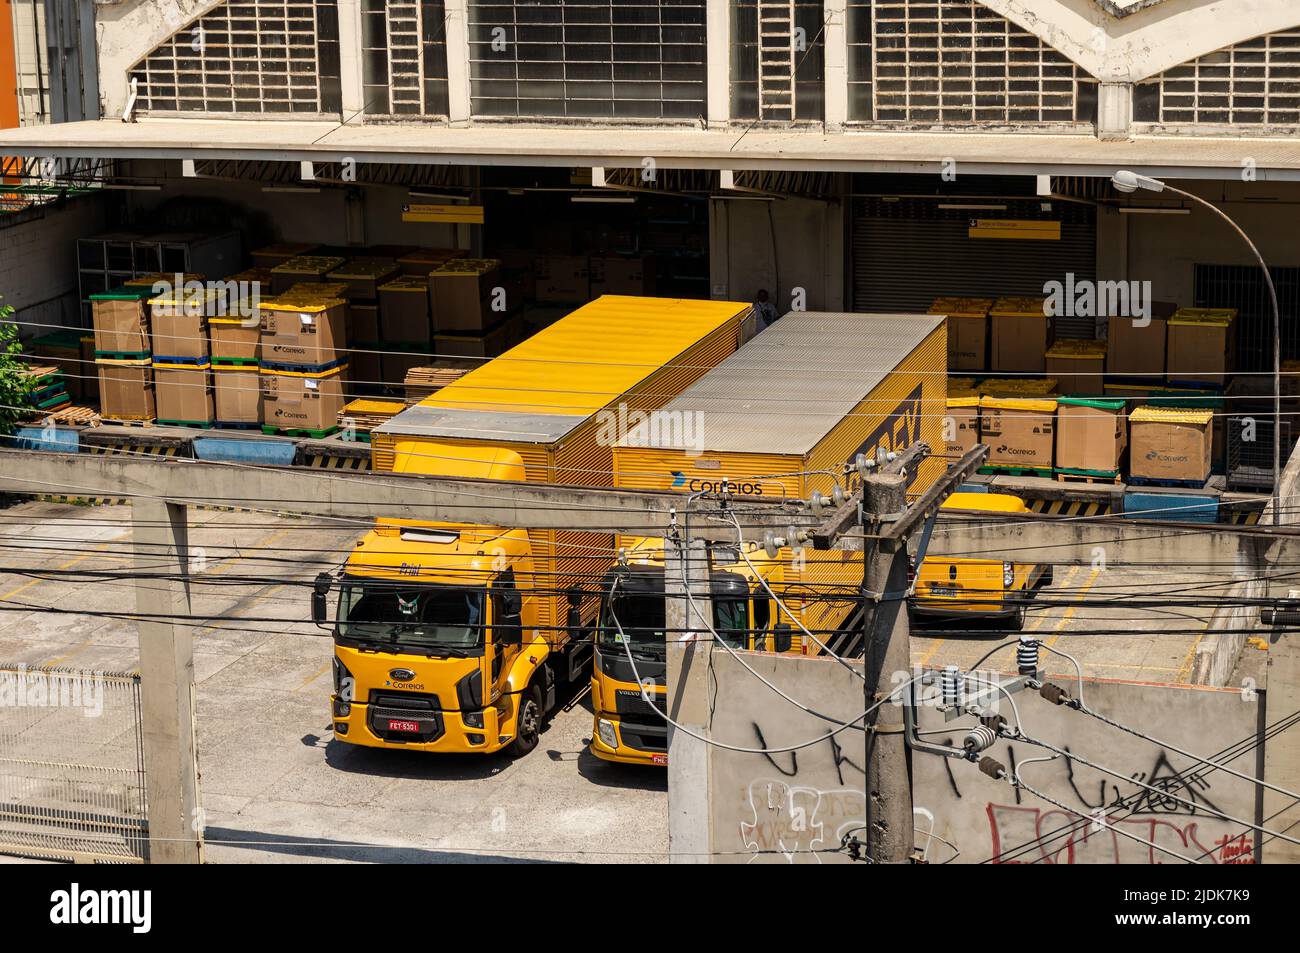 Yellow SEDEX delivery trucks parked behind the Correios package delivery center waiting for cargo at the loading bay in Agua Branca district. Stock Photo